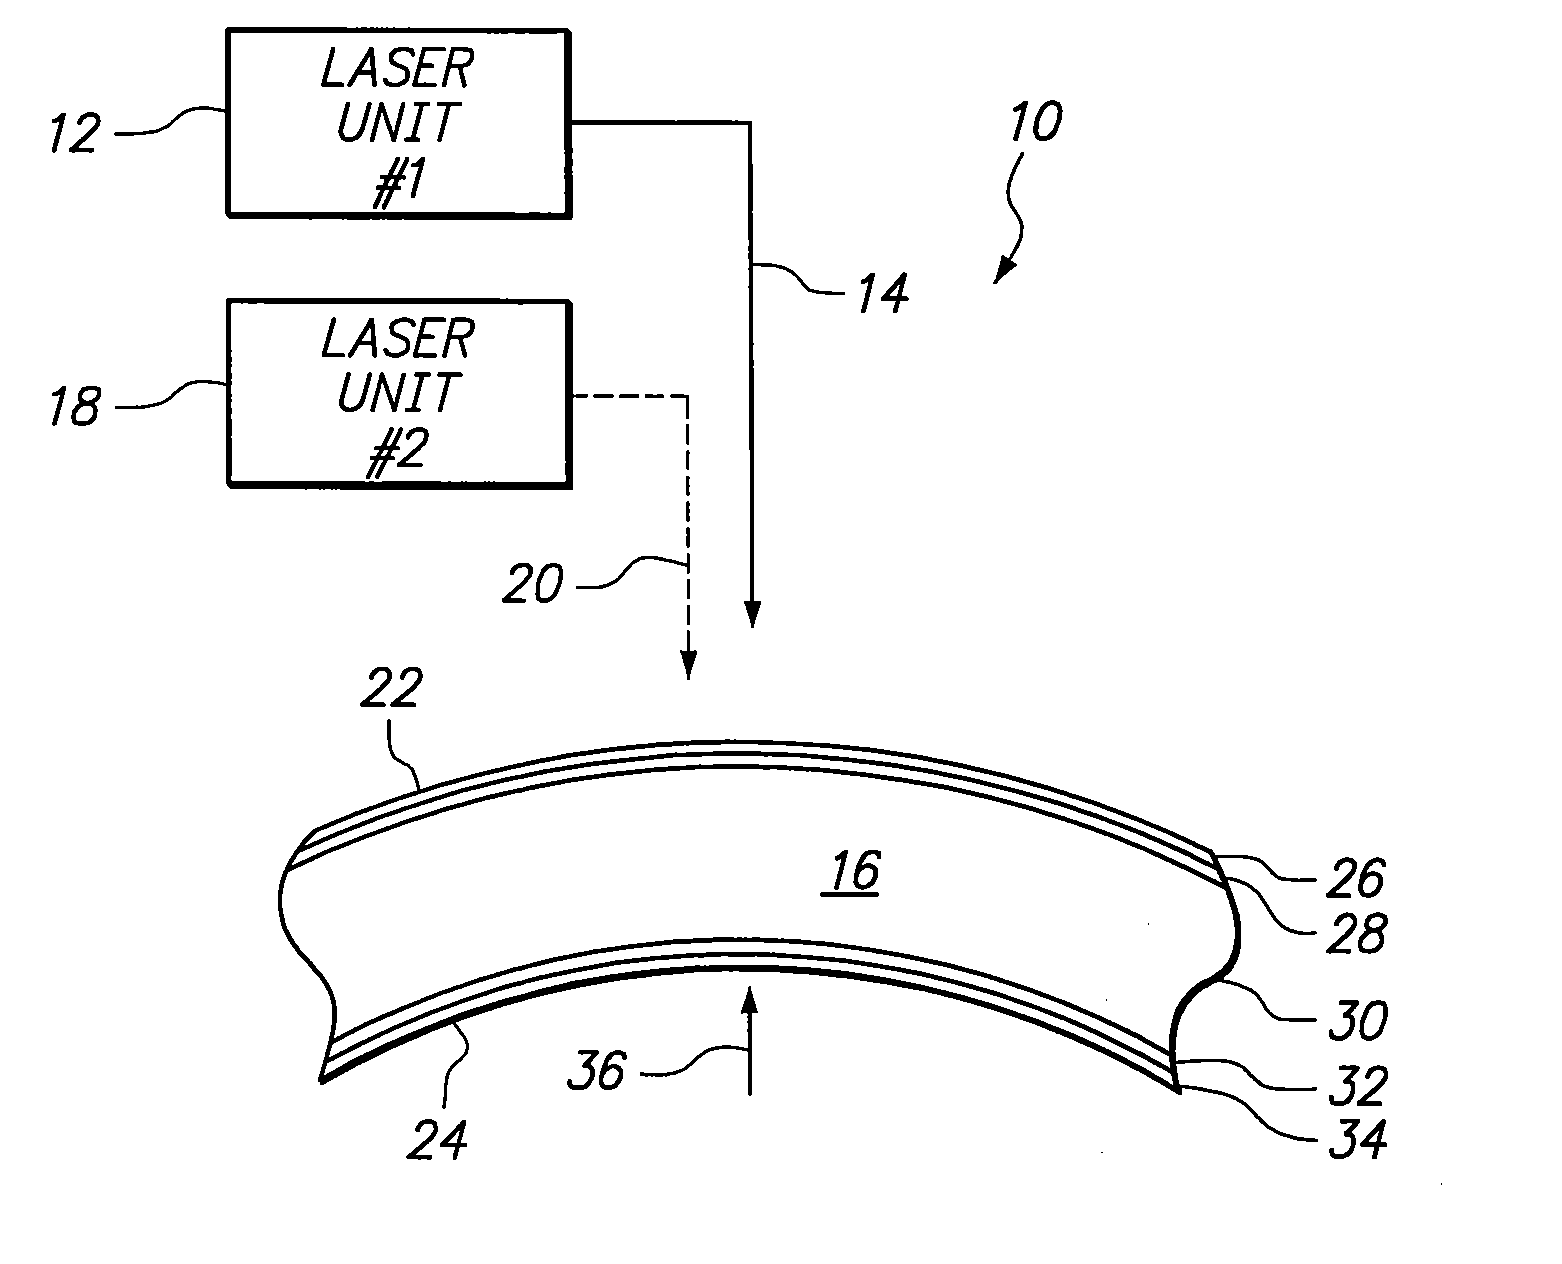 System and Method for Refractive Surgery with Augmentation by Intrastromal Corrective Procedures